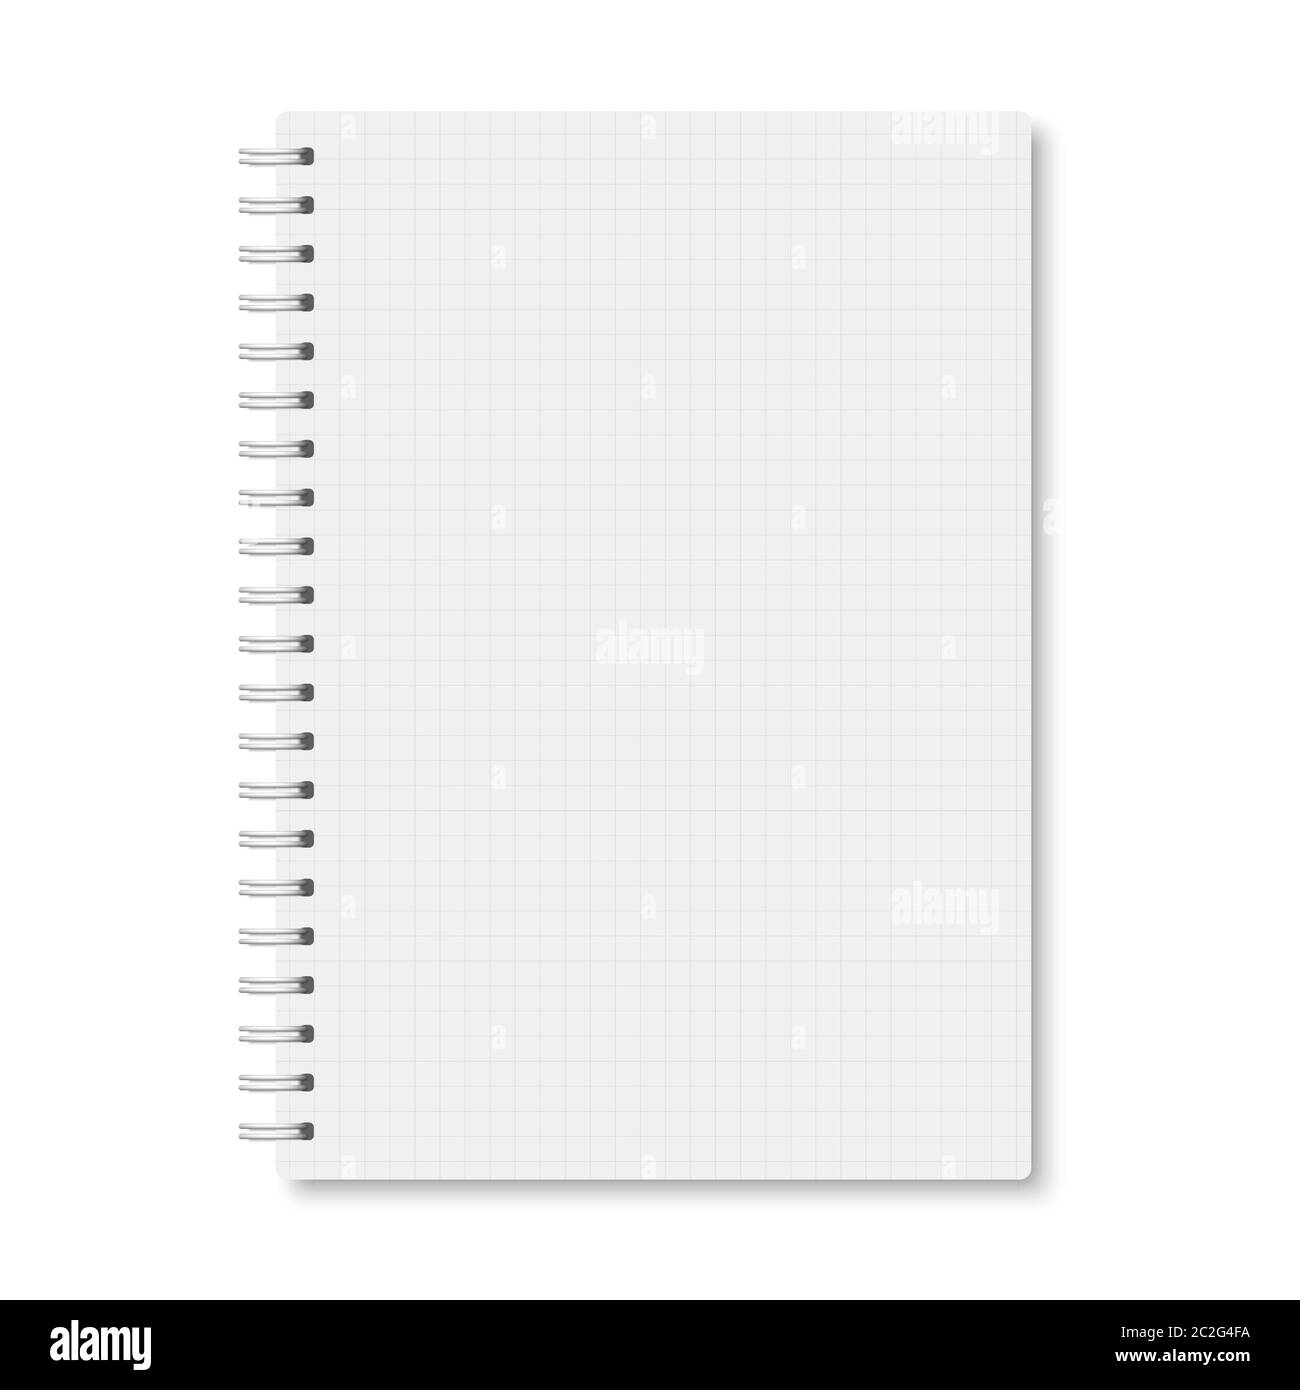 https://c8.alamy.com/comp/2C2G4FA/white-realistic-a5-notebook-closed-with-soft-shadows-vector-vertical-blank-copybook-with-metallic-white-spiral-on-white-background-mock-up-of-cell-l-2C2G4FA.jpg